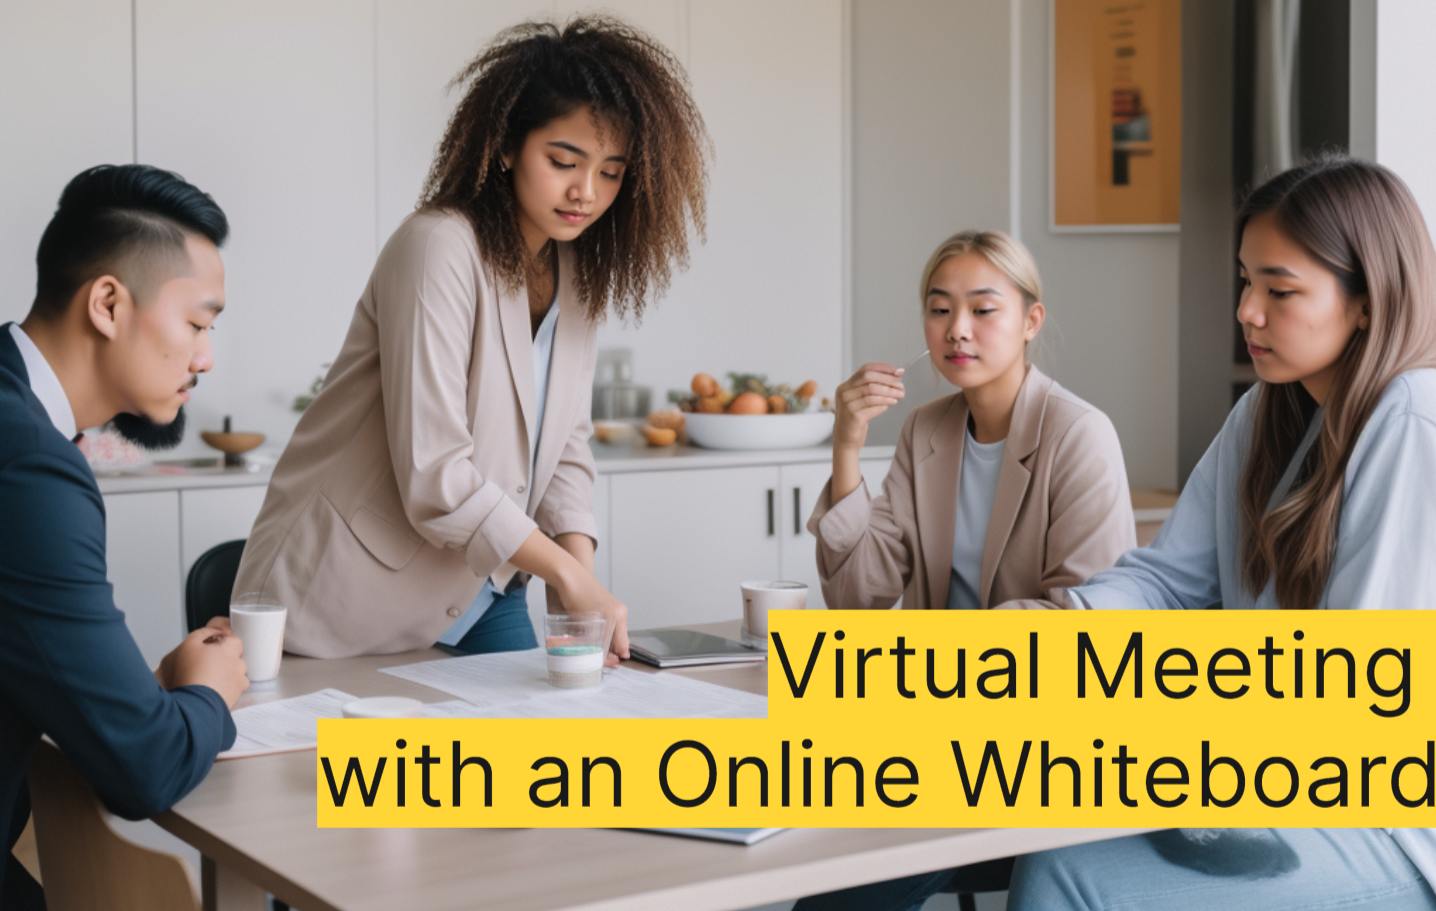 How to Conduct a Virtual Meeting with an Online Whiteboard